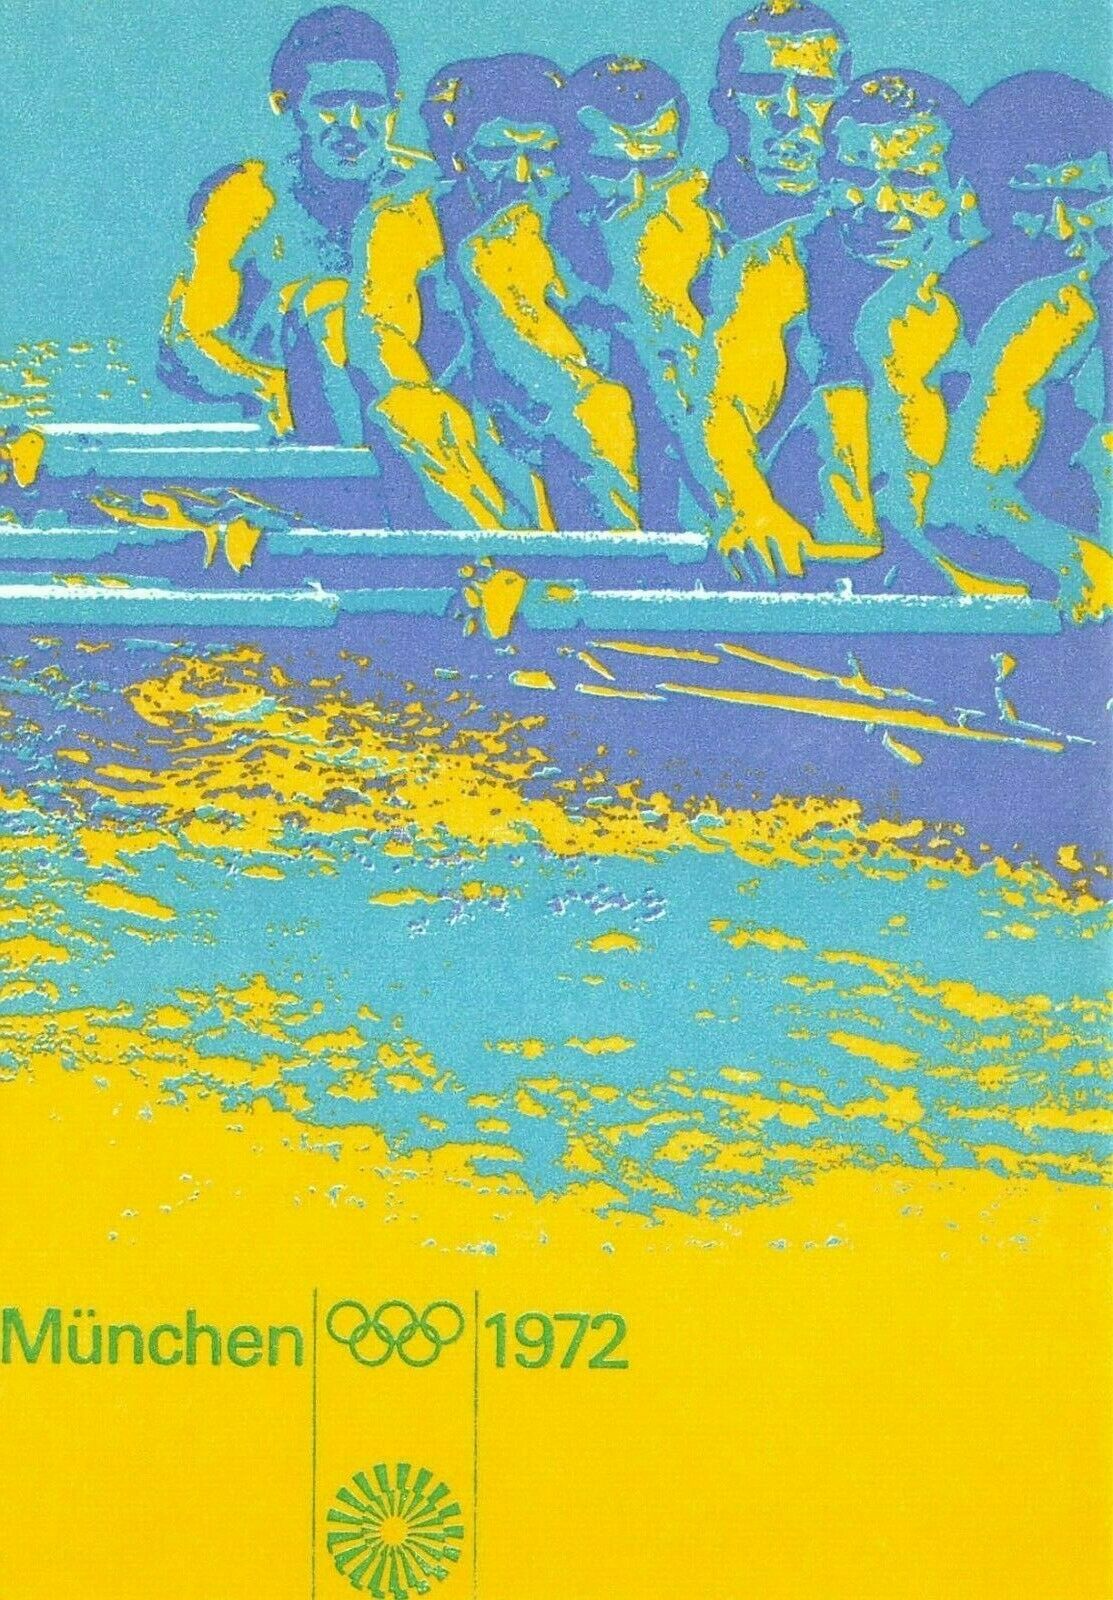 C6807 Munich 1972 Olympic Poster Postcard - Scullers Rowing - 13th Of 14 Designs